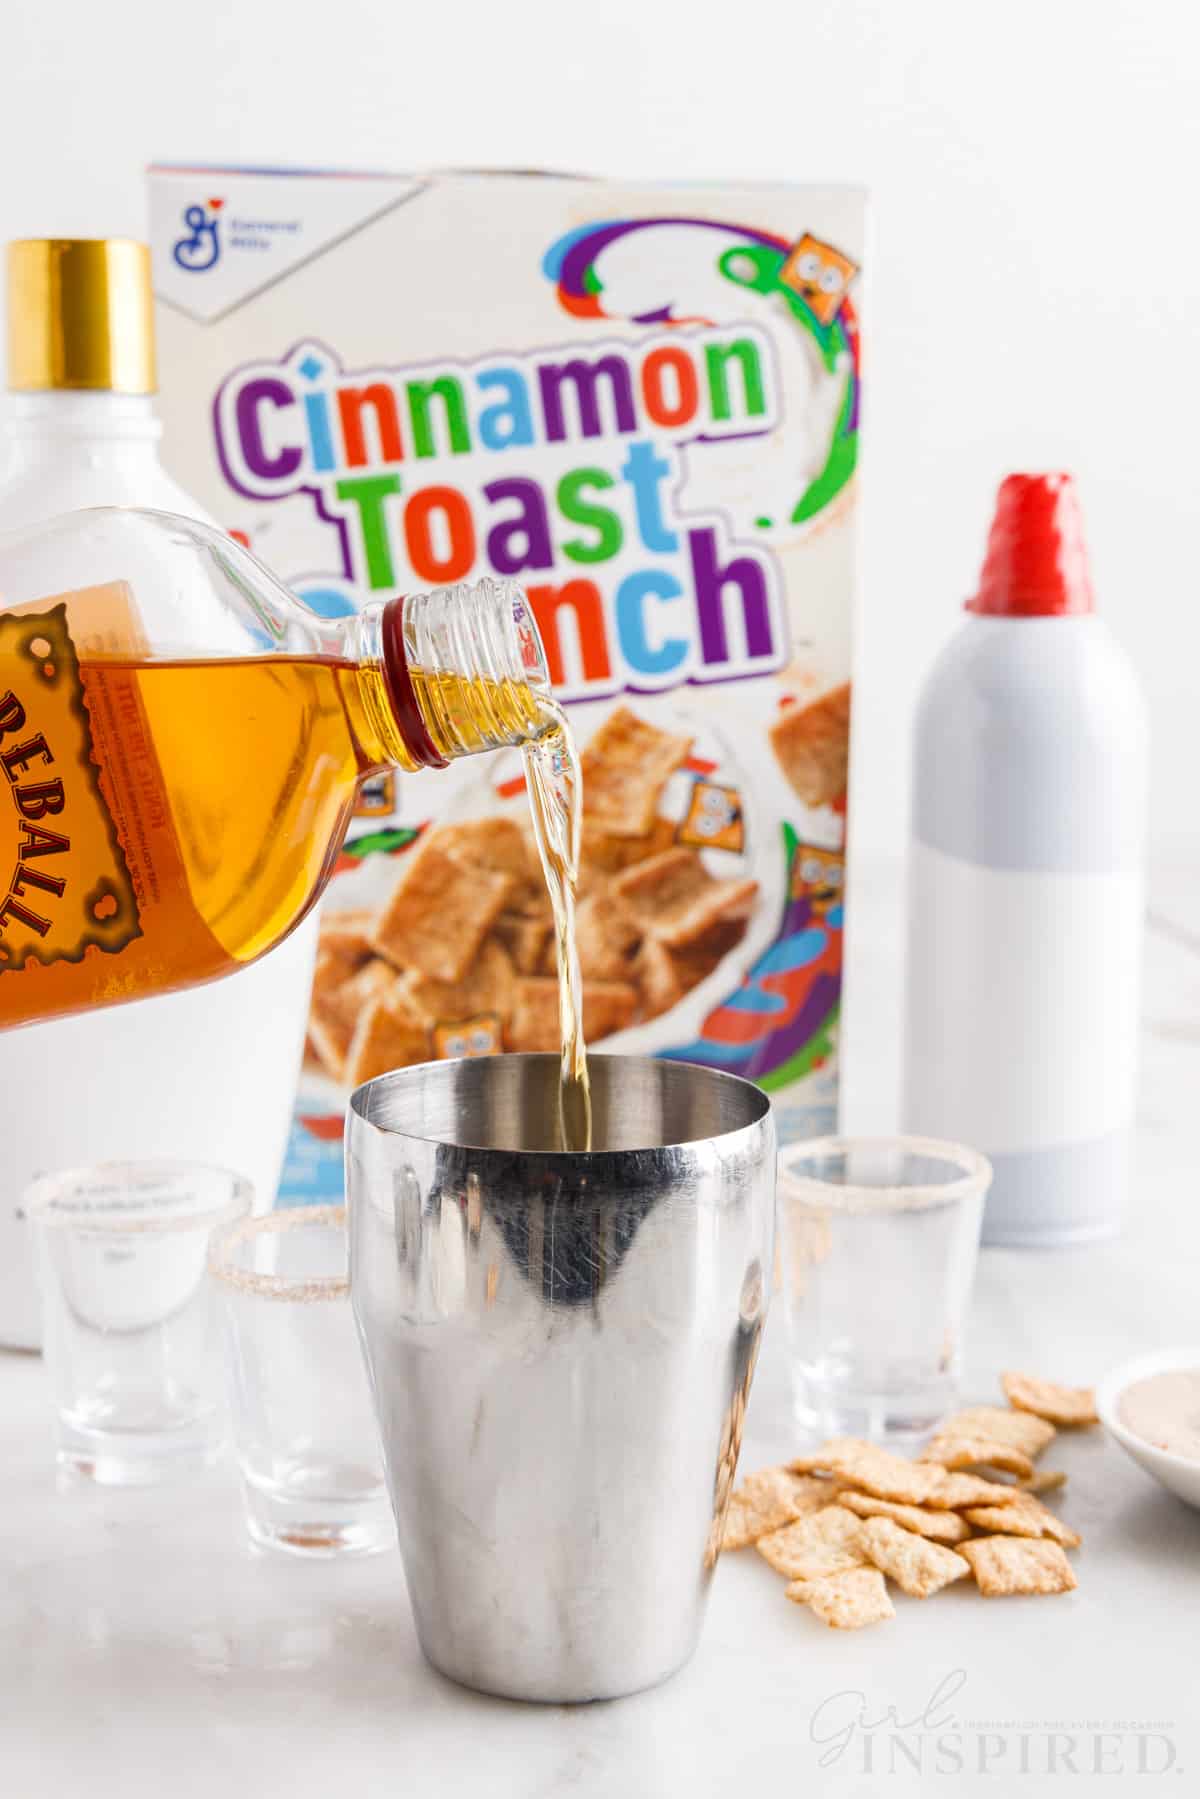 Fireball whiskey poured into a shaker cinnamon toast crunch in the background.